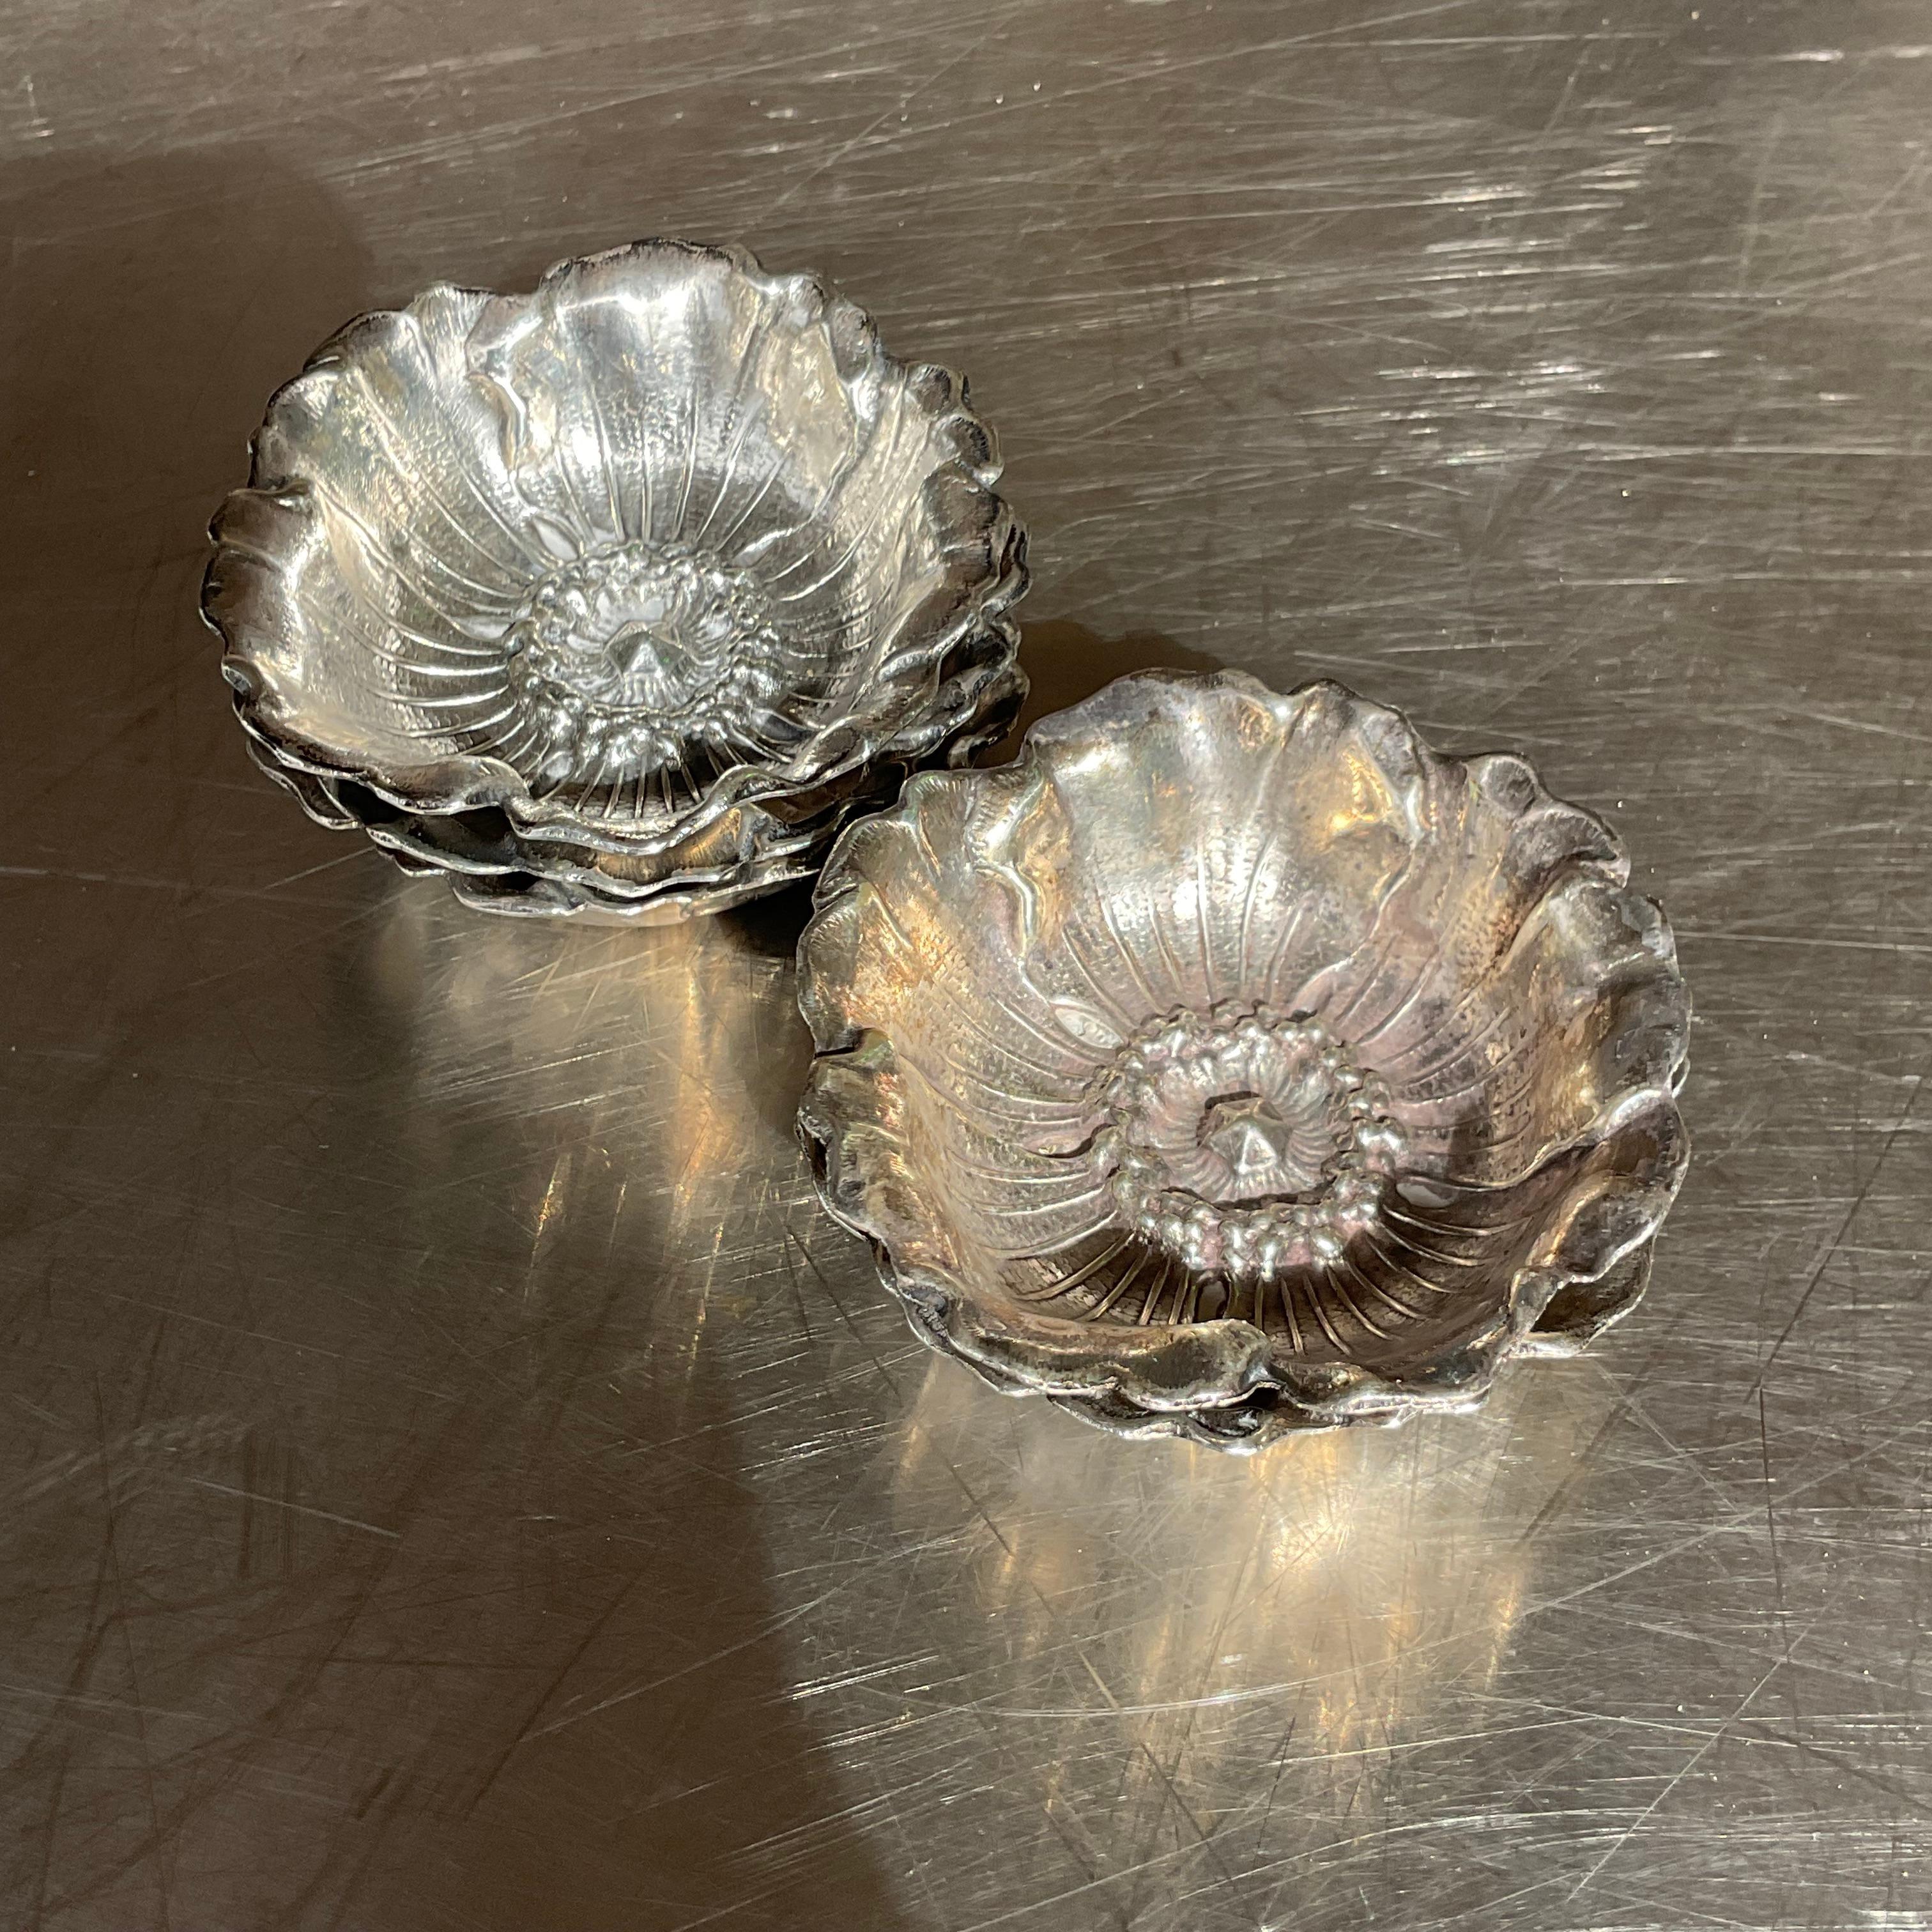 A fabulous set of five vintage Regency salt cellars. Made by the iconic Buccellati group and marked on the bottom. Their coveted Poppy design in the small size. Acquired from a Palm Beach estate